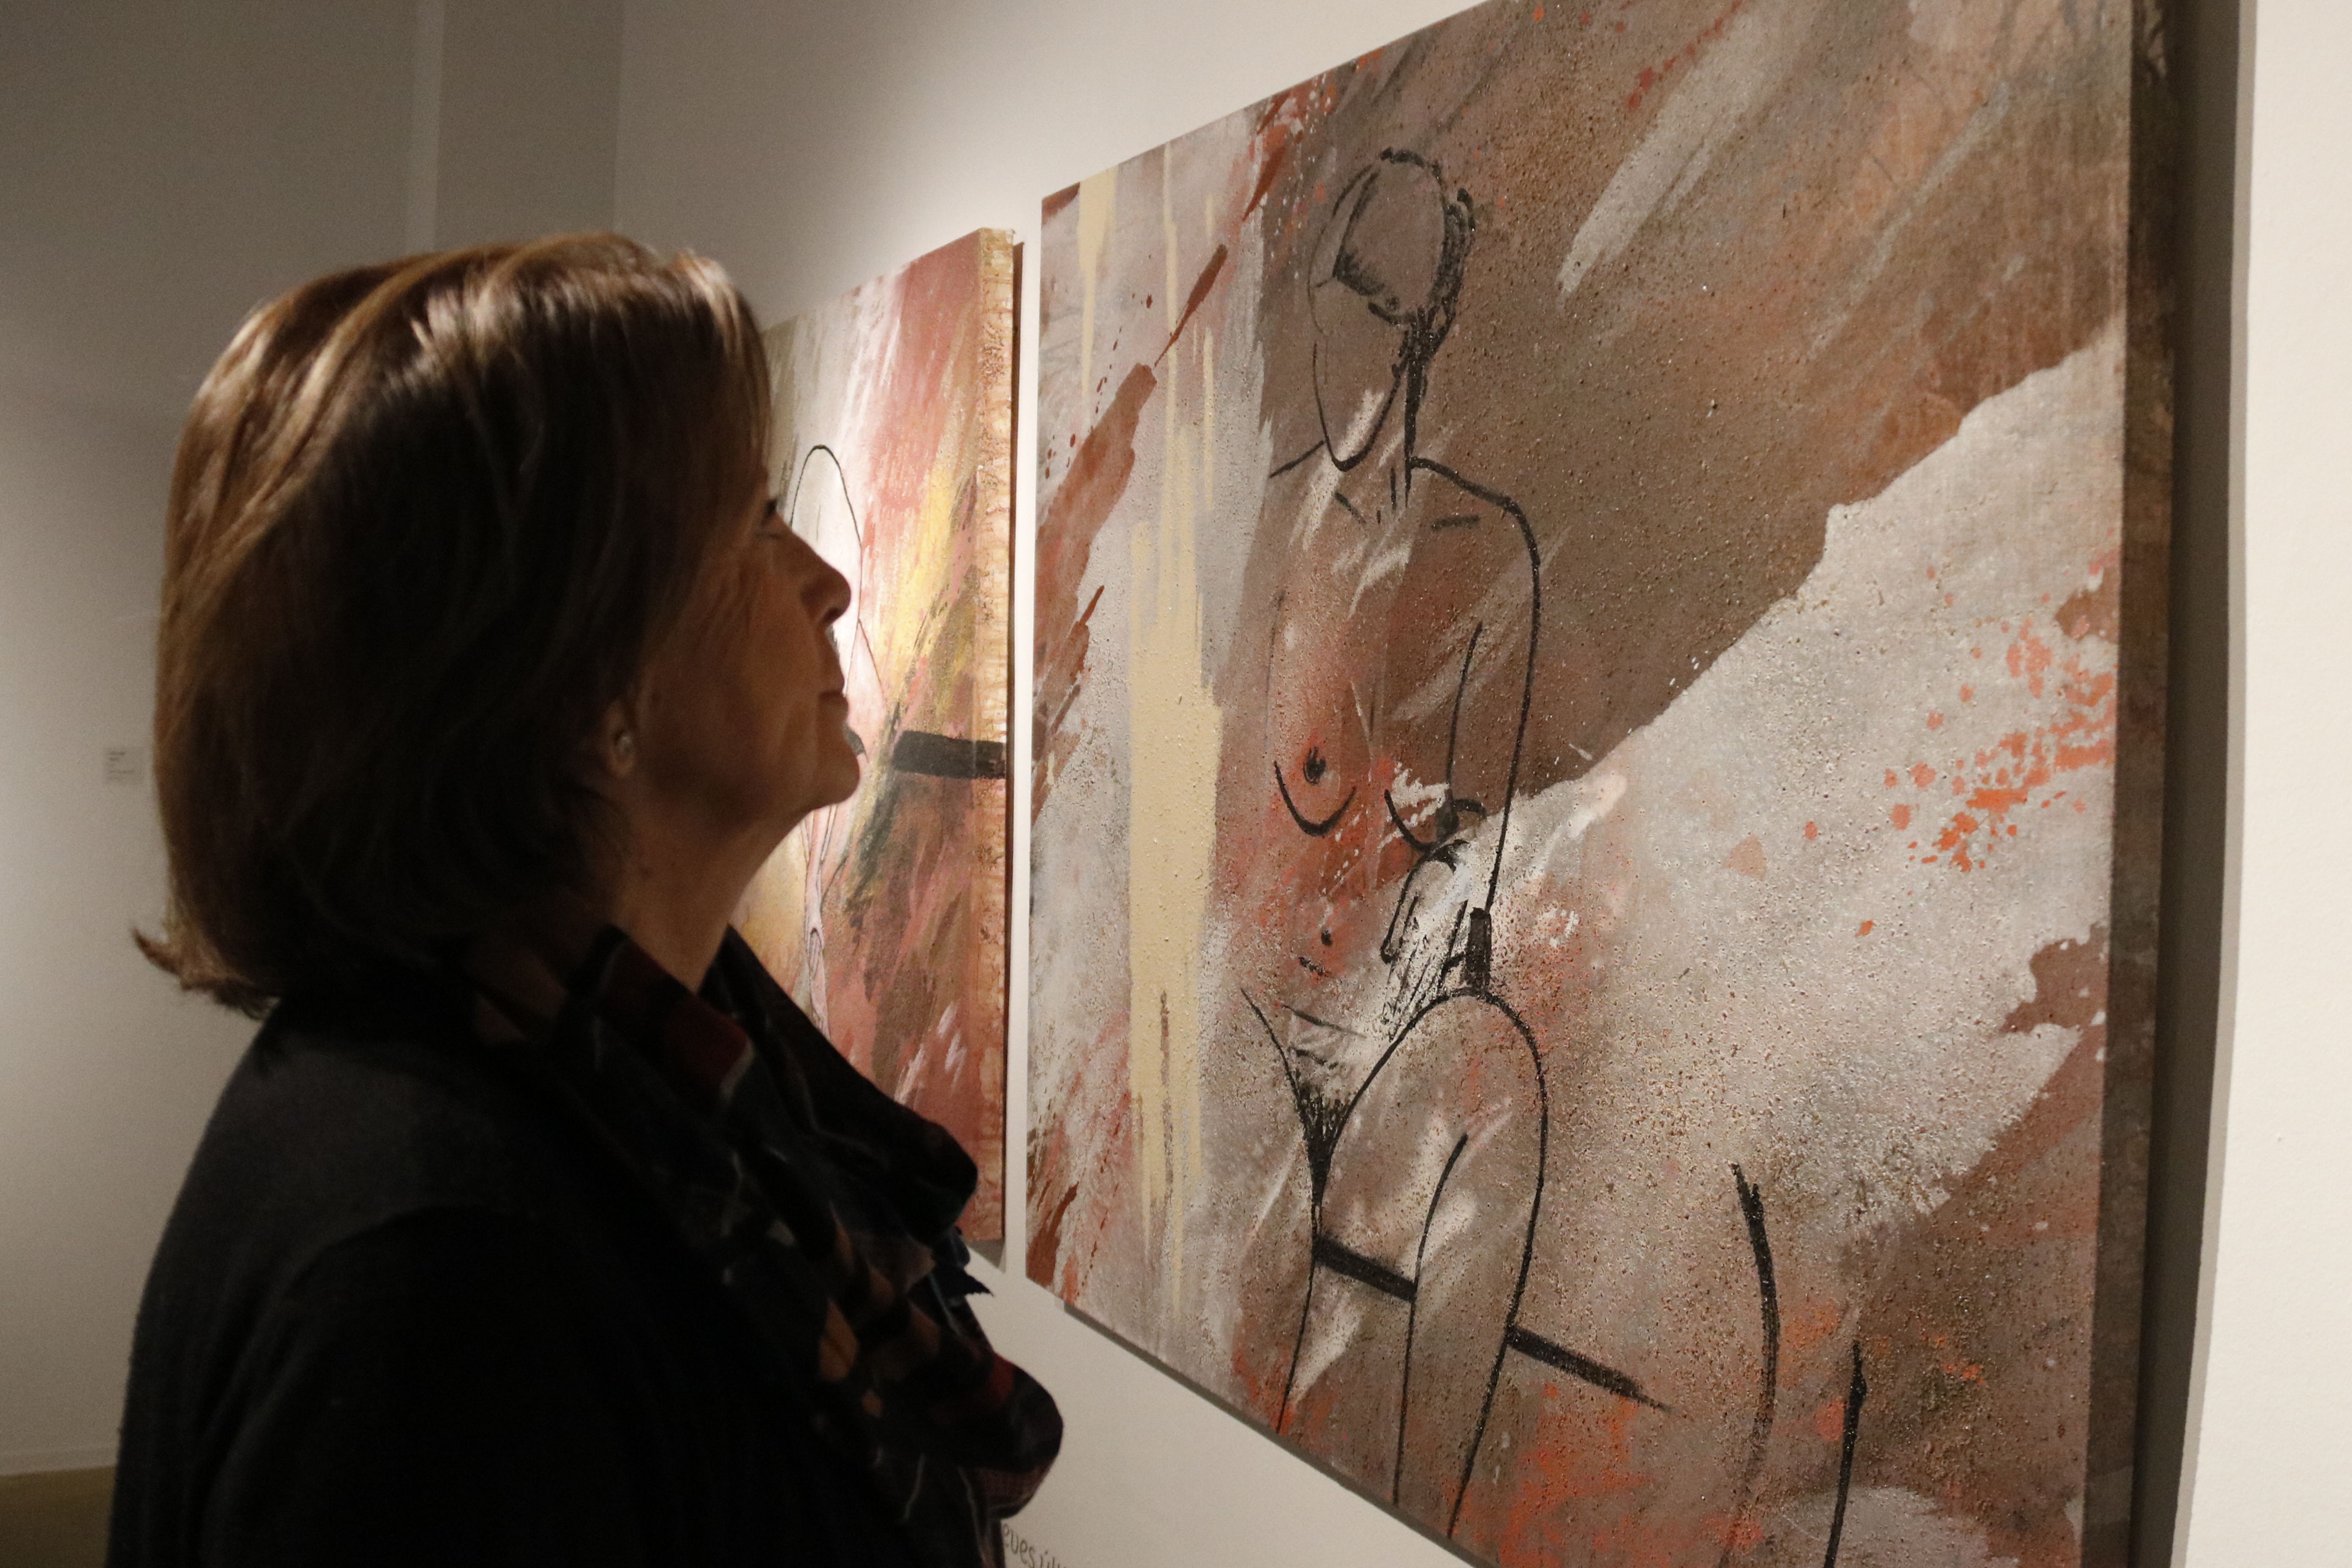 Artist Xita Fornt looking at her work exhibited at the Can Mario museum (by Lourdes Casademont)